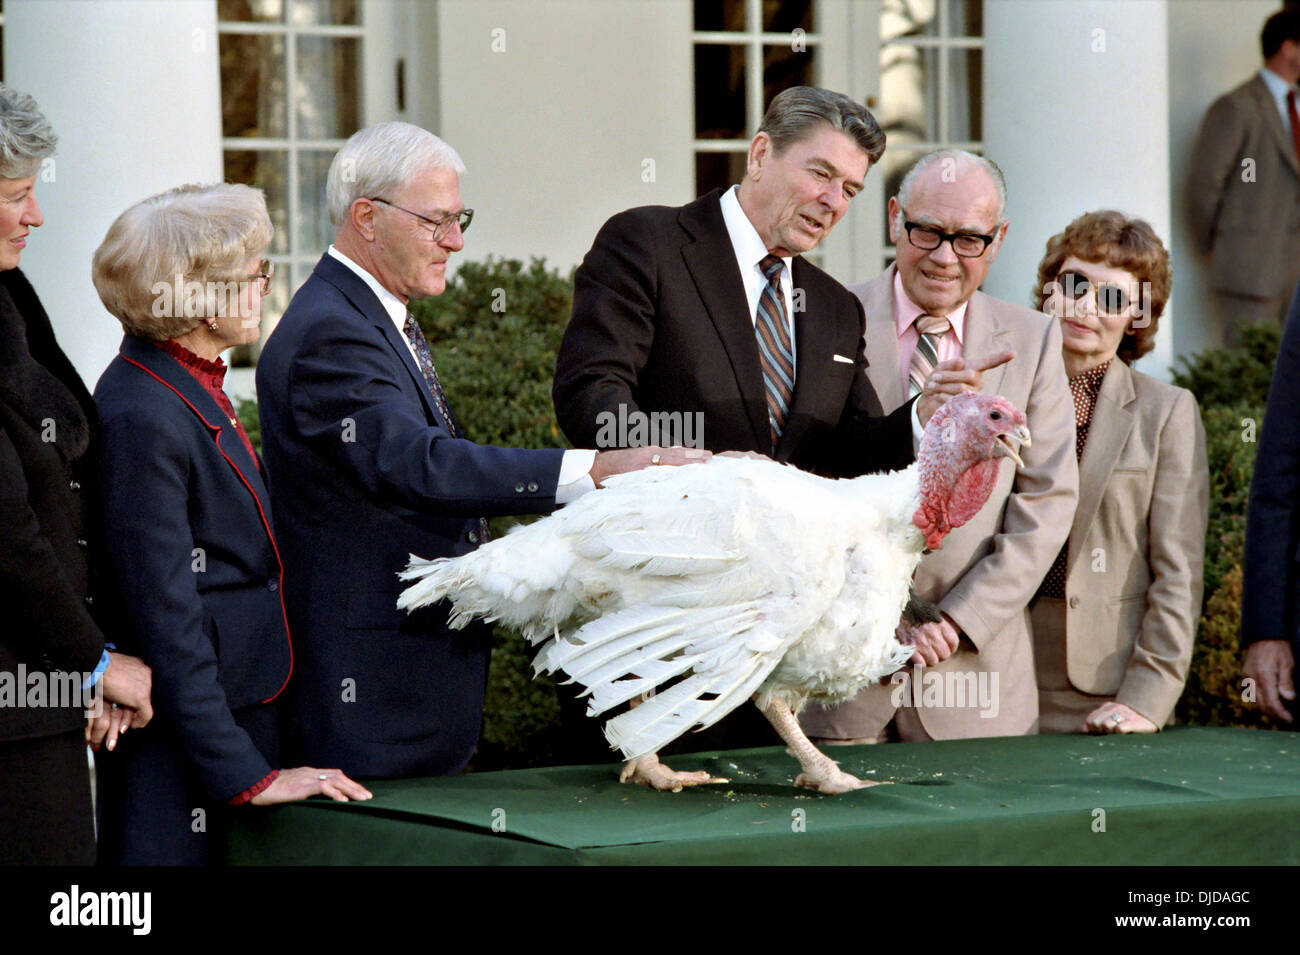 US President Ronald Reagan during the presentation of the Thanksgiving Turkey from the President and Executive Vice President of the National Turkey Federation William Prestage and Lew Walts in the Rose Garden of the White House November 21, 1983 in Washington, DC. Stock Photo